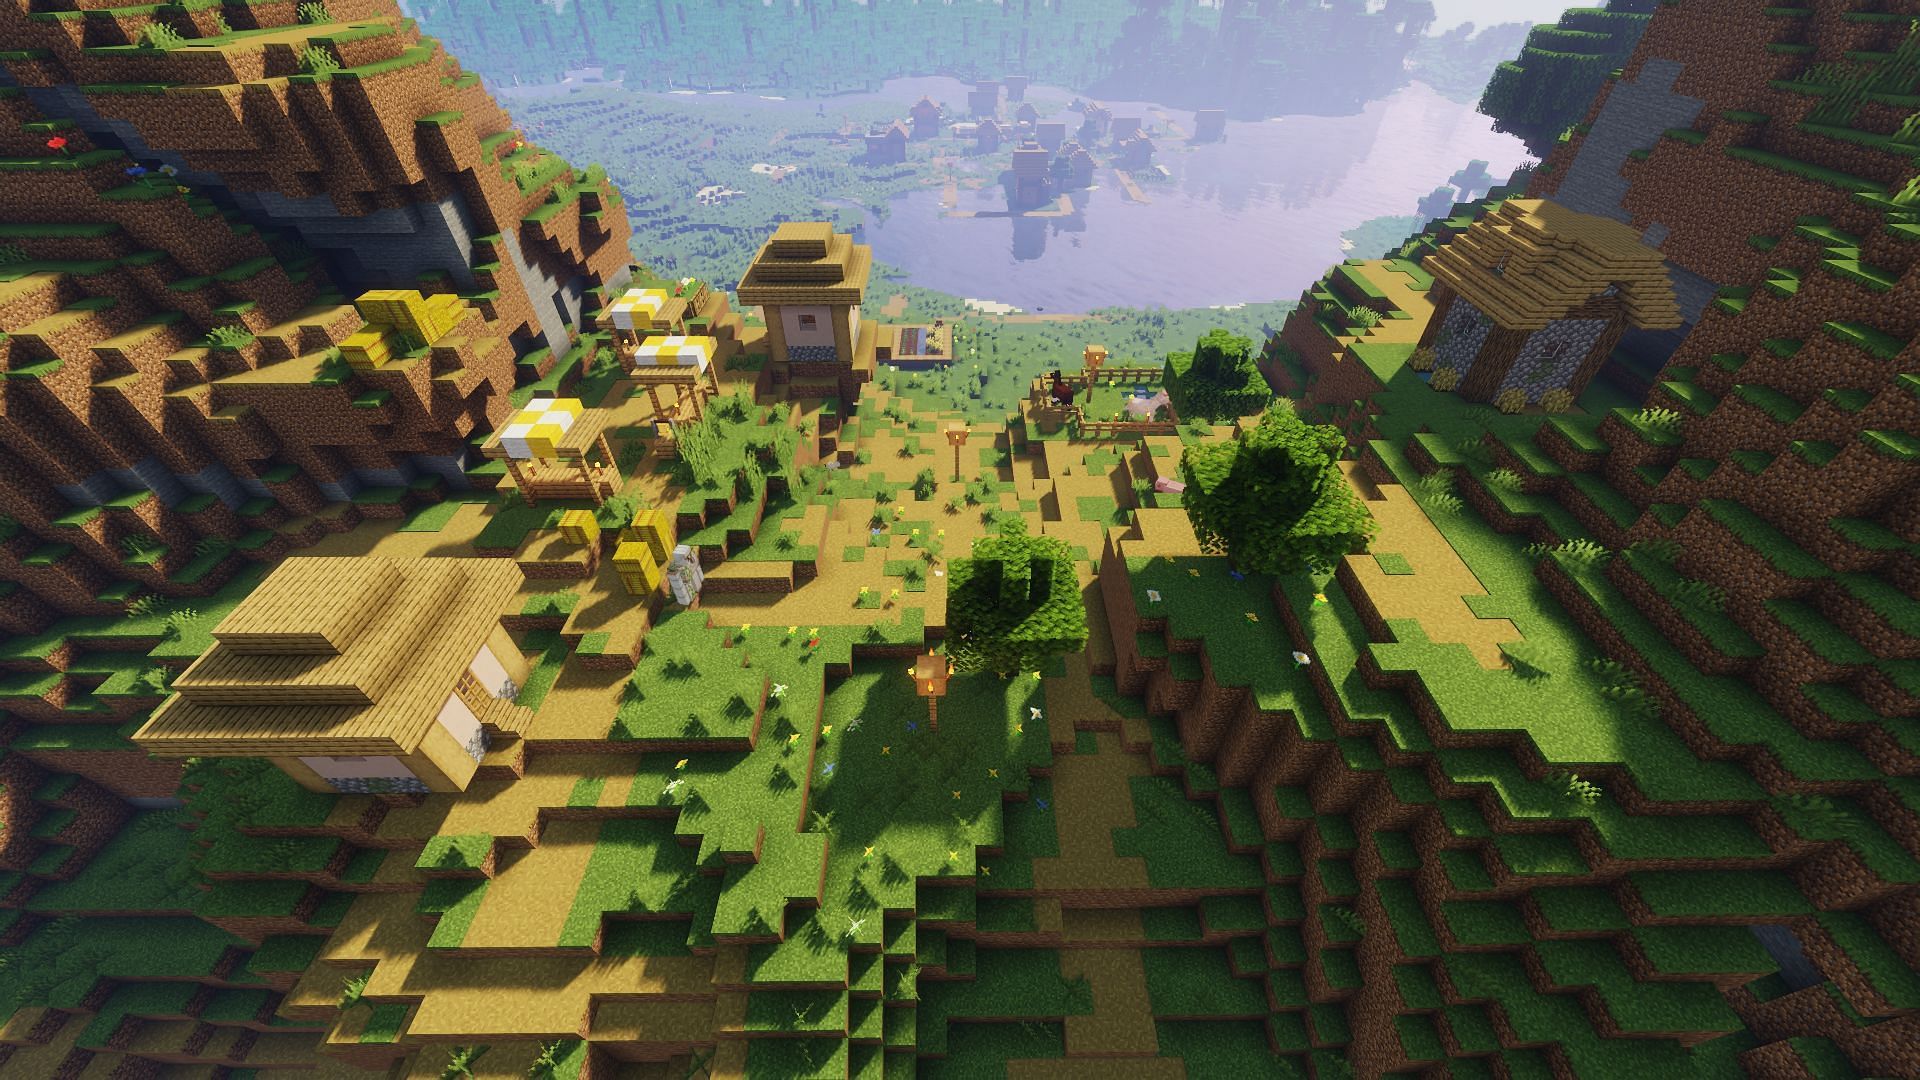 Villages tend to be the thing that turn a great seed godly (Image via Mojang)